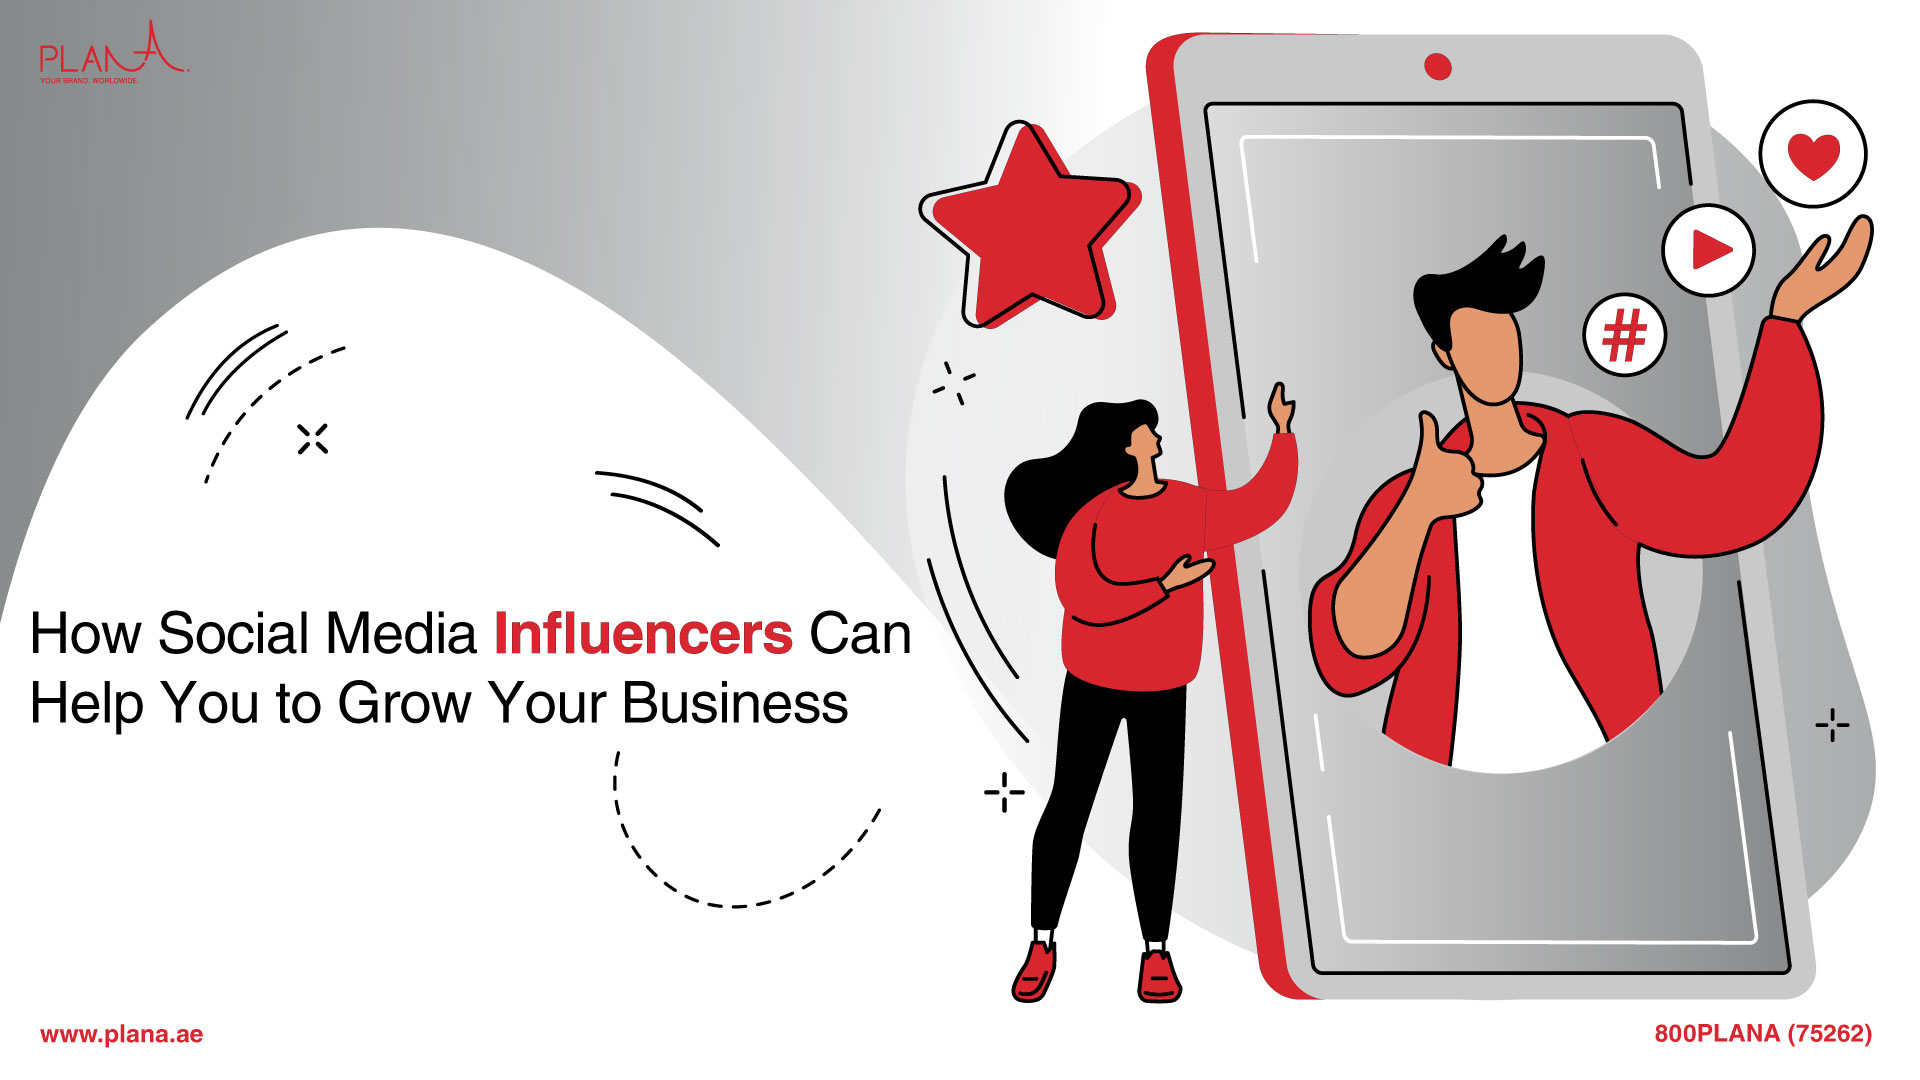 How Social Media Influencers Can Help You to Grow Your Business